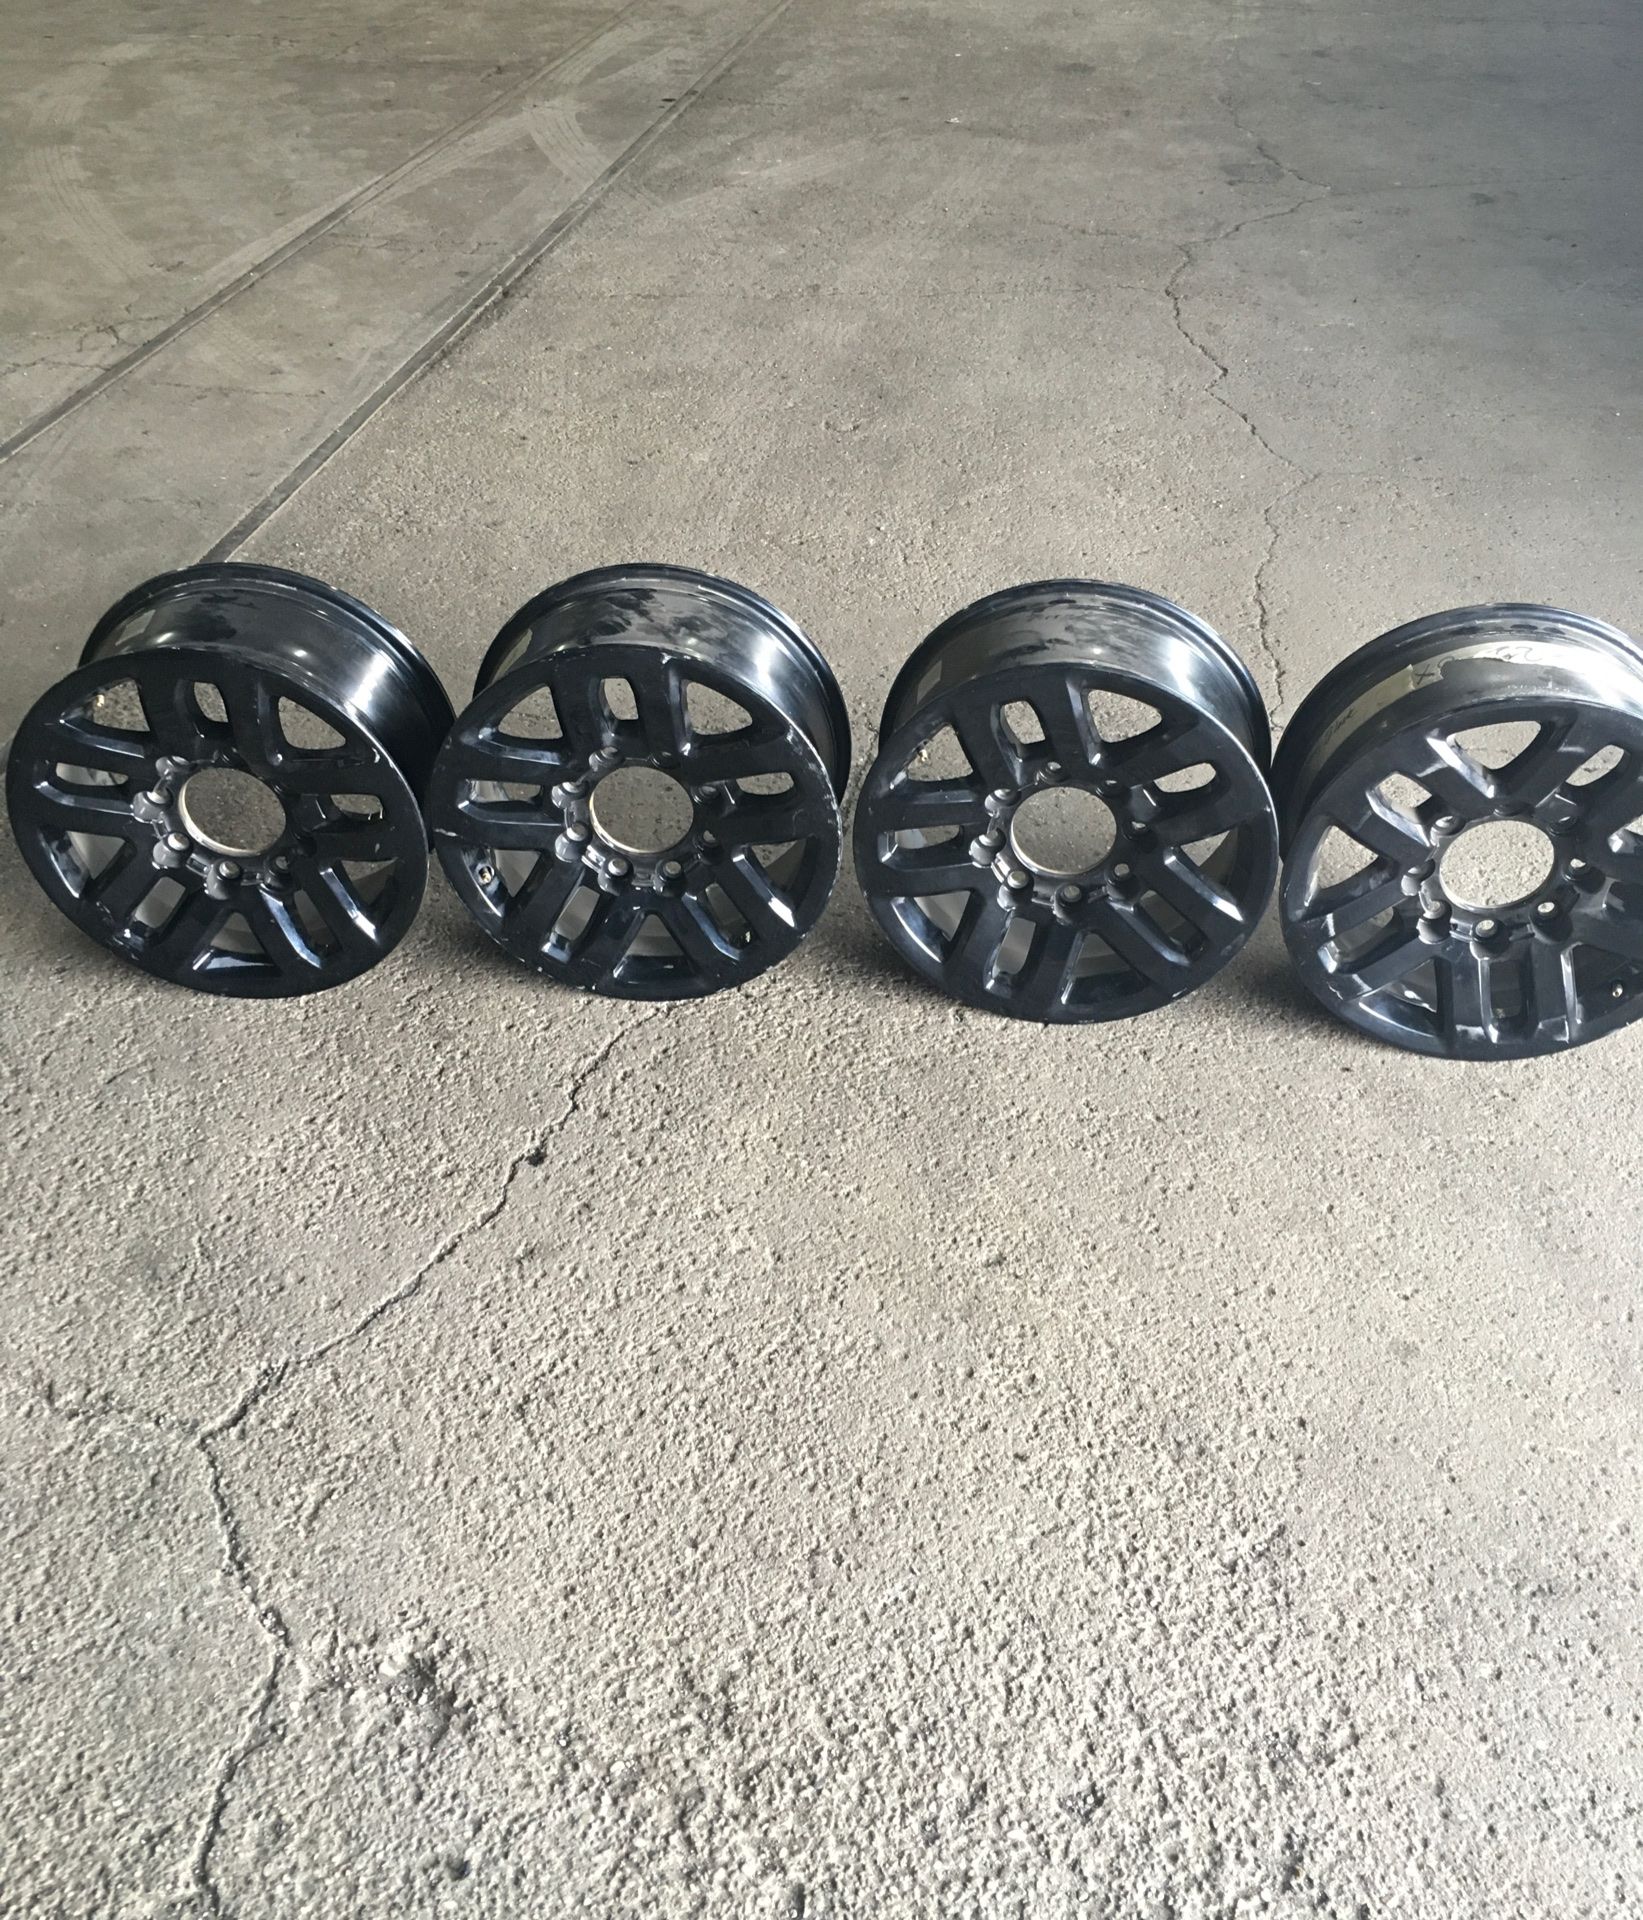 Rims 18x8 with a 8x180 bolt pattern